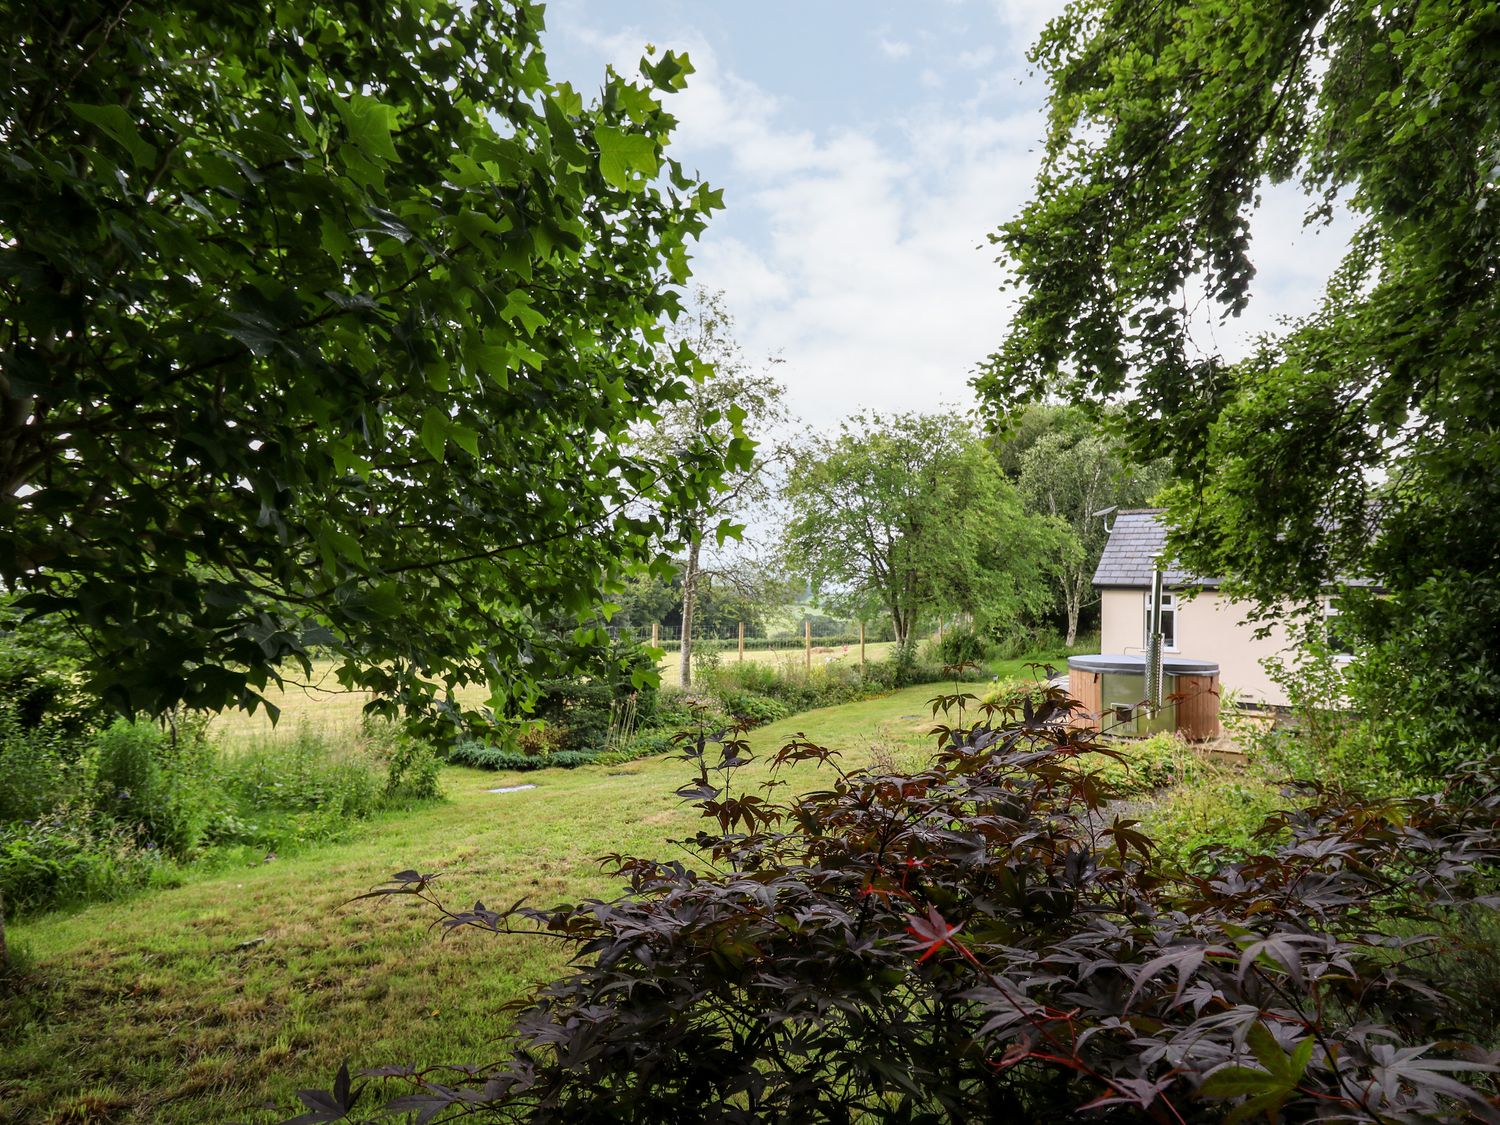 Howling Point, in Rhayader, Powys, Wales. Hot tub. 4 Smart TVs. Woodburning stove. Off-road parking.